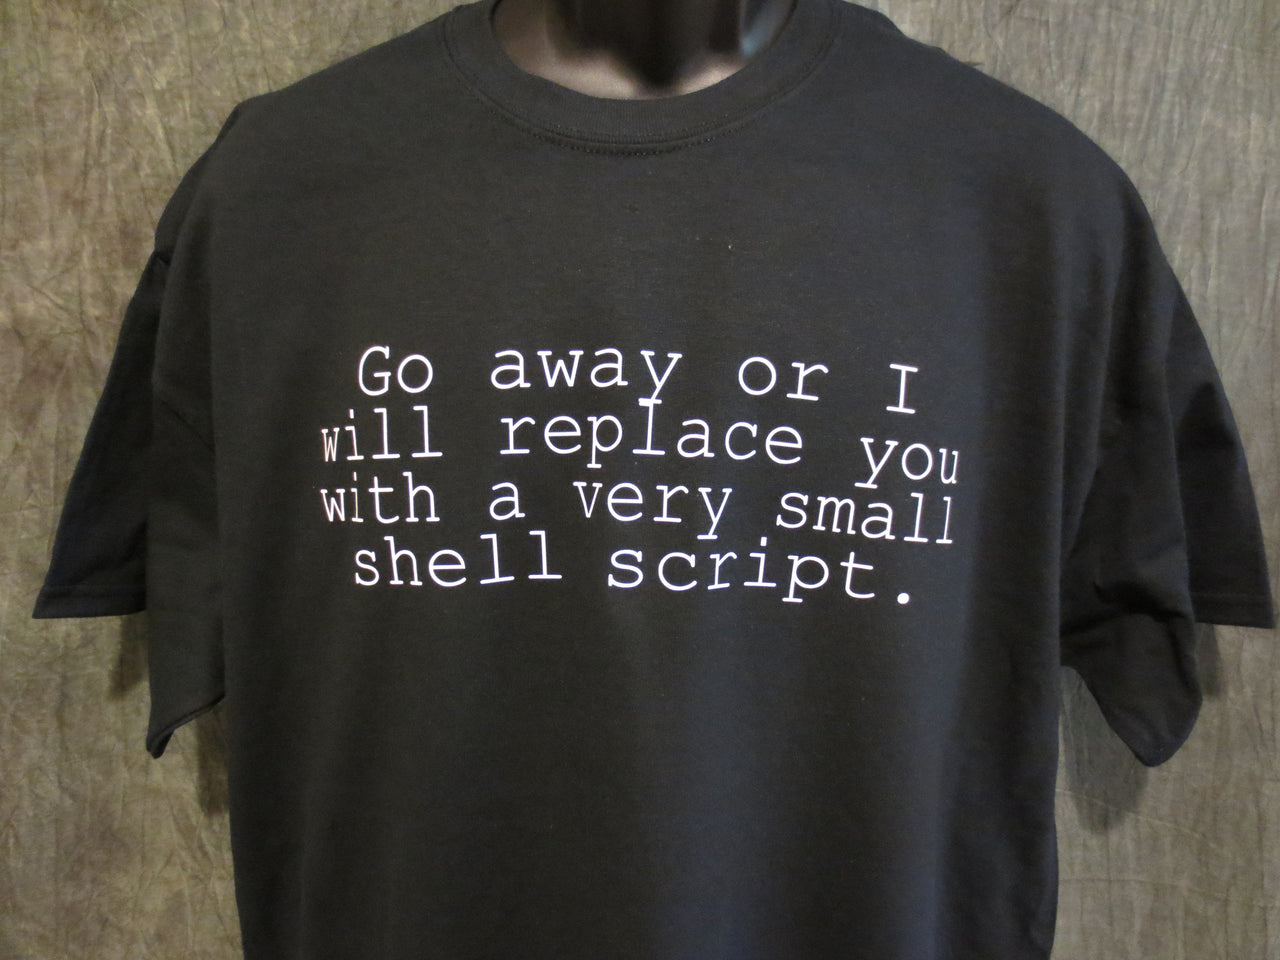 Go Away or I will Replace you With a Very Small Shell Script Tshirt: Black With White Print - TshirtNow.net - 4